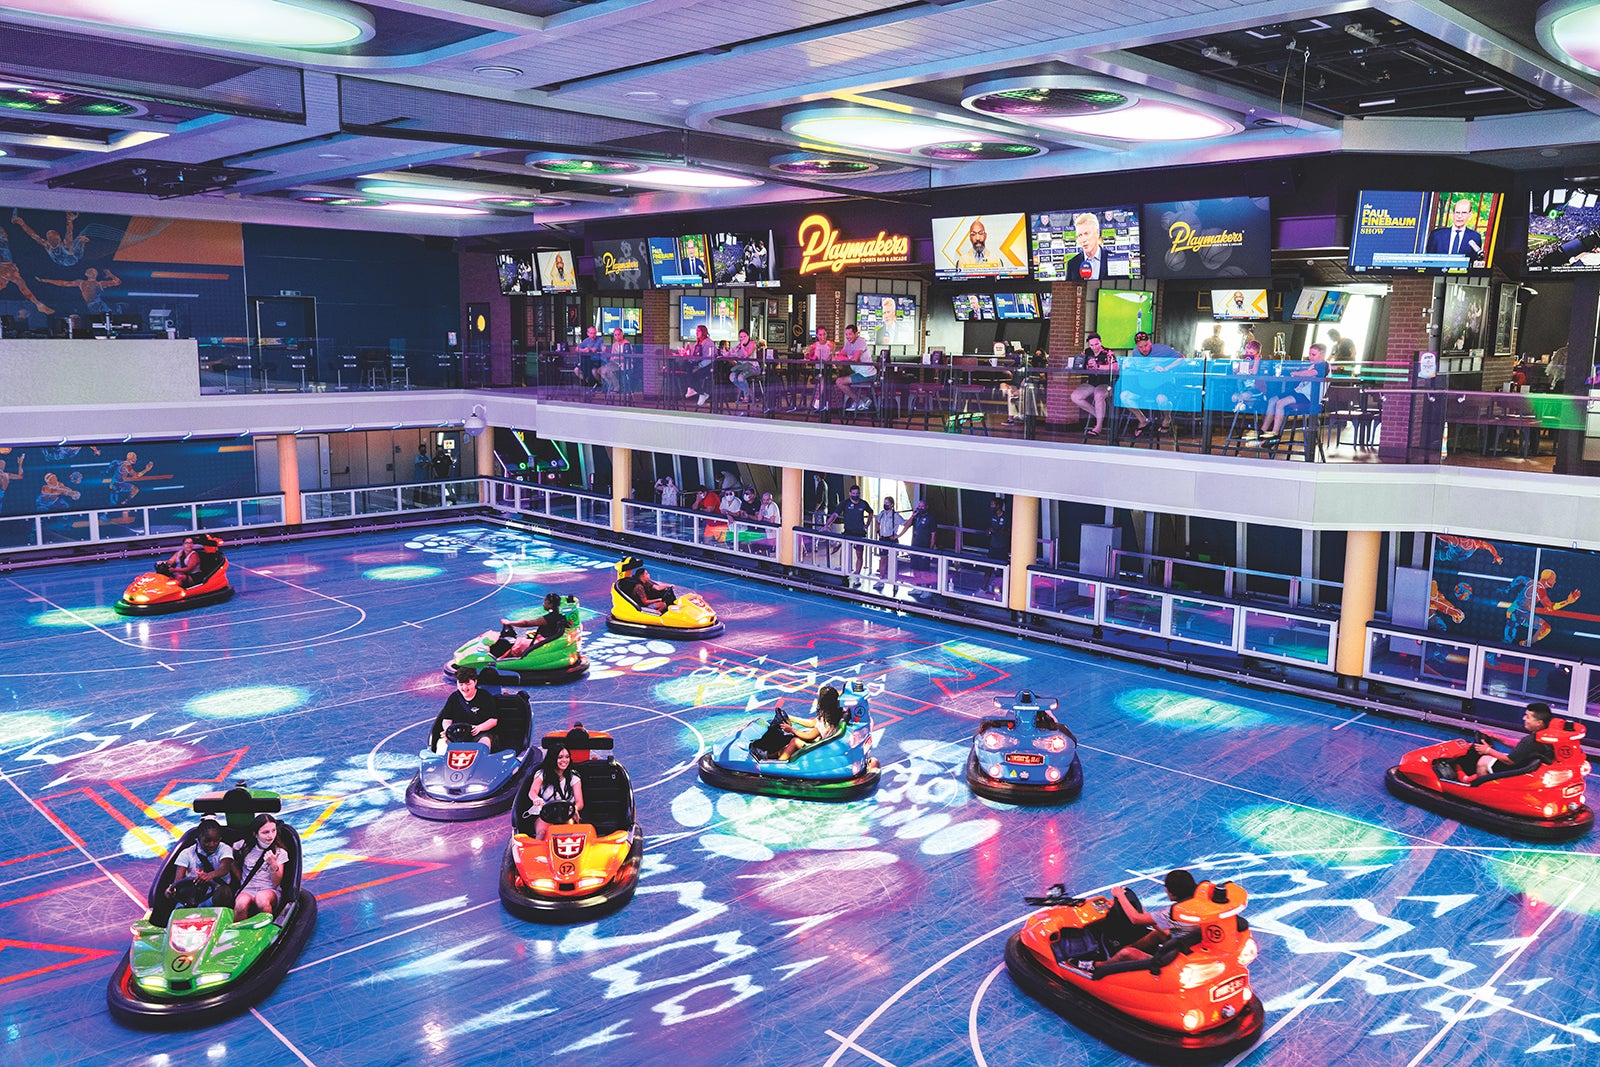 SeaPlex on Odyssey of the Seas with bumper cars.